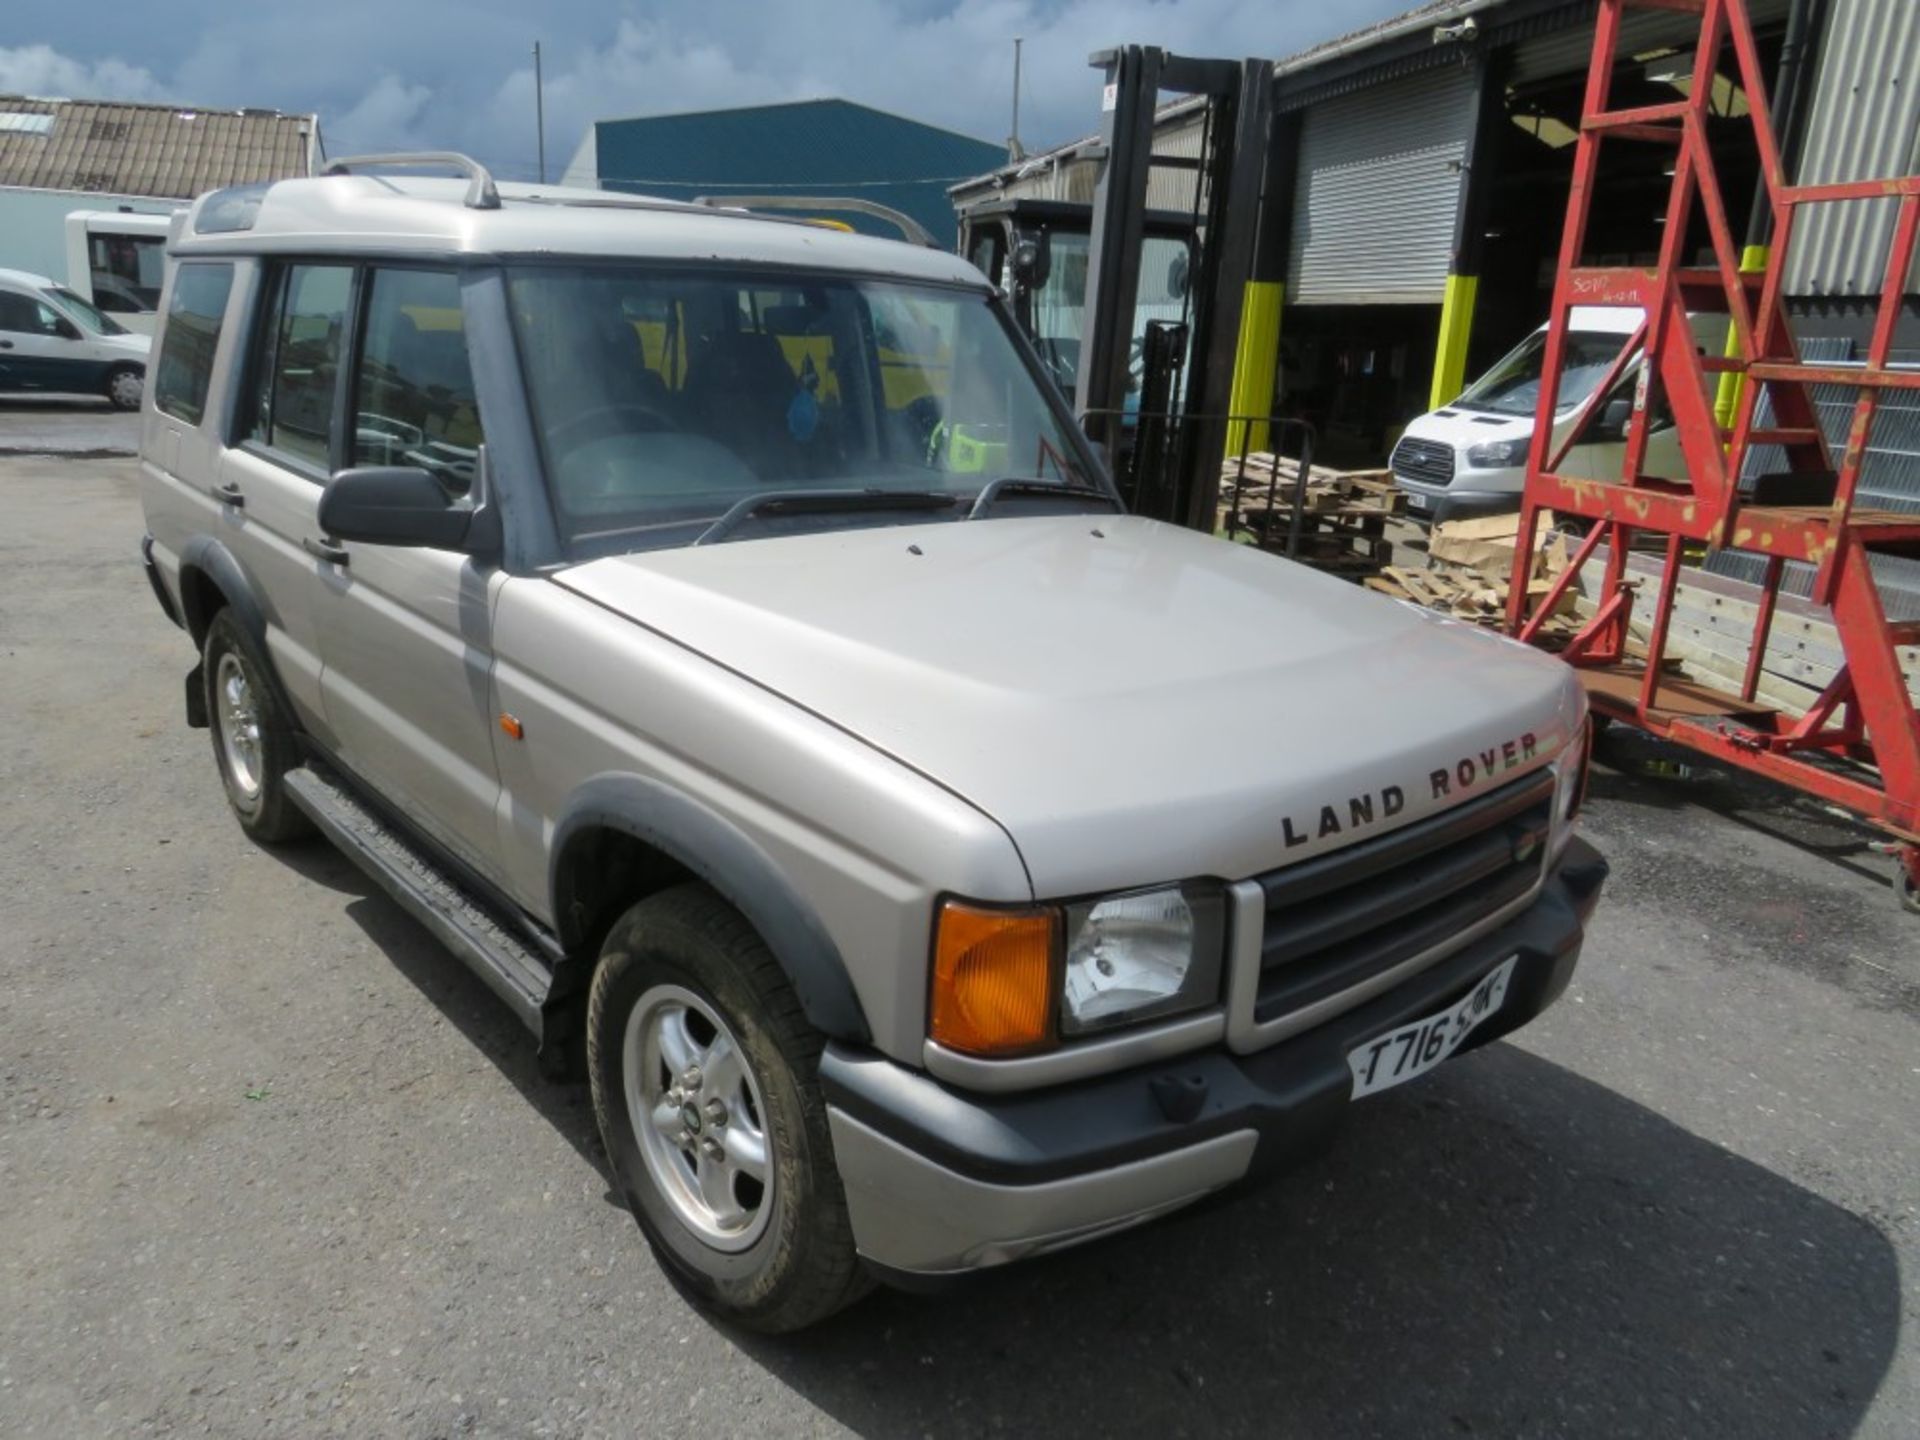 T reg LAND ROVER DISCOVERY TD5 GS, 1ST REG 06/99, TEST 02/22, 163620M, V5 HERE, 2 FORMER KEEPERS [NO